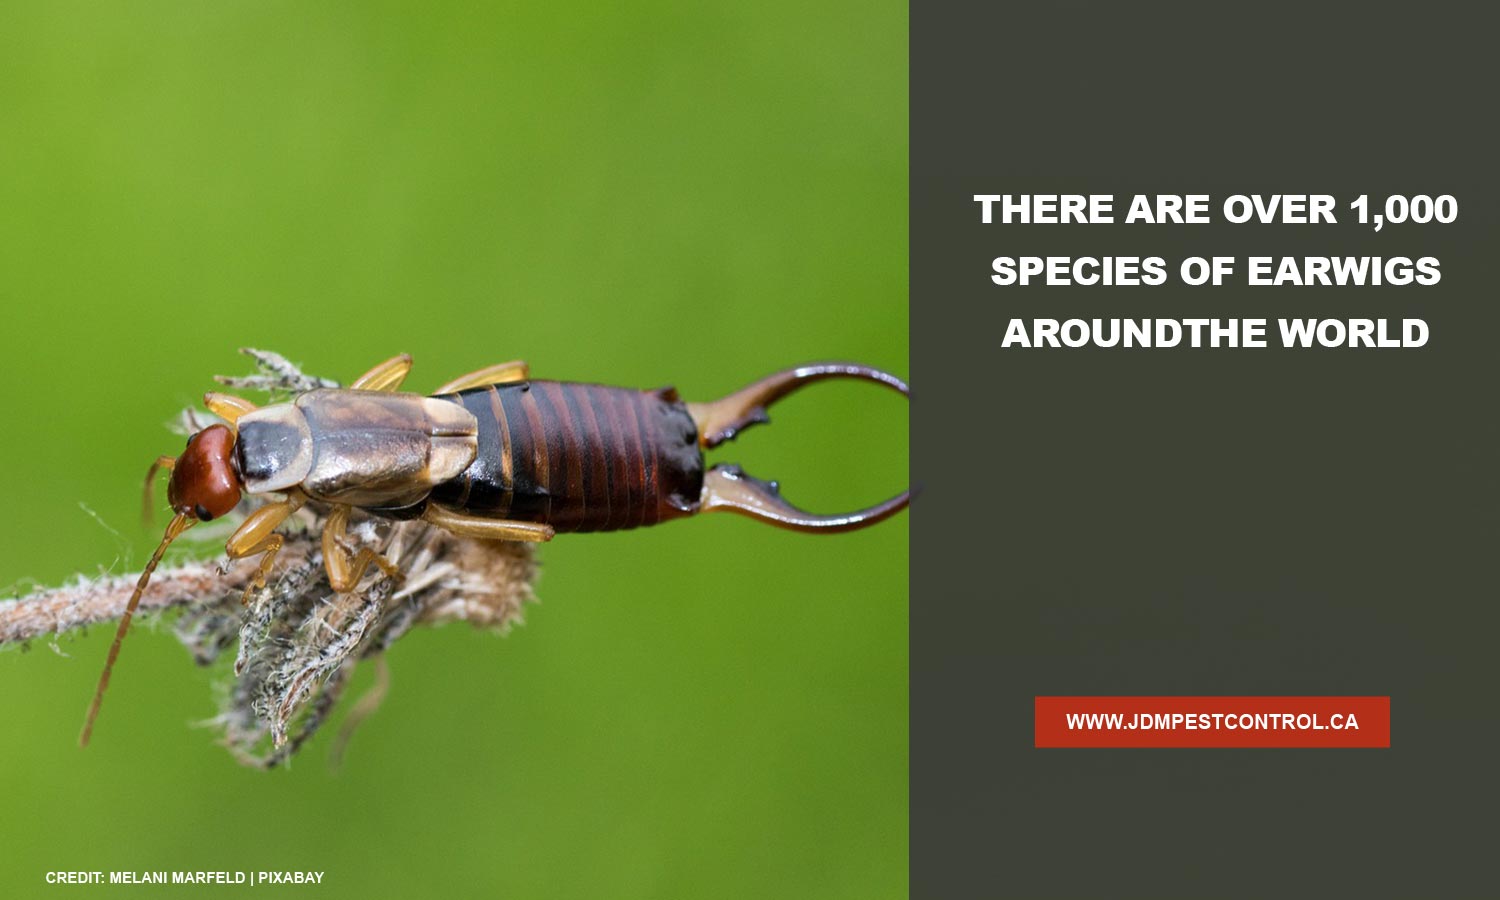 There are over 1,000 species of earwigs around the world